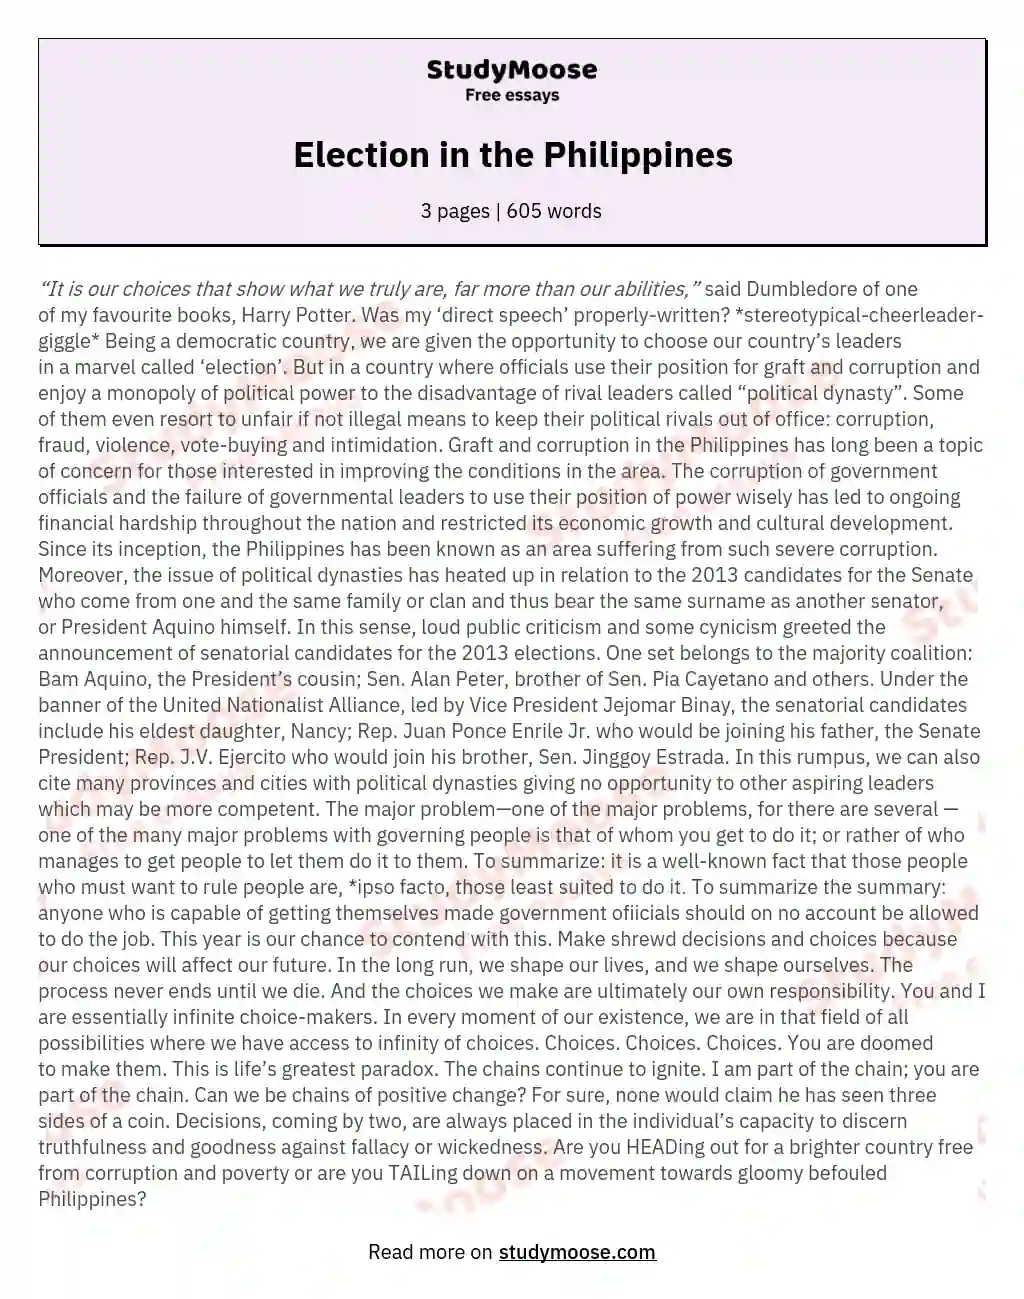 Election in the Philippines essay